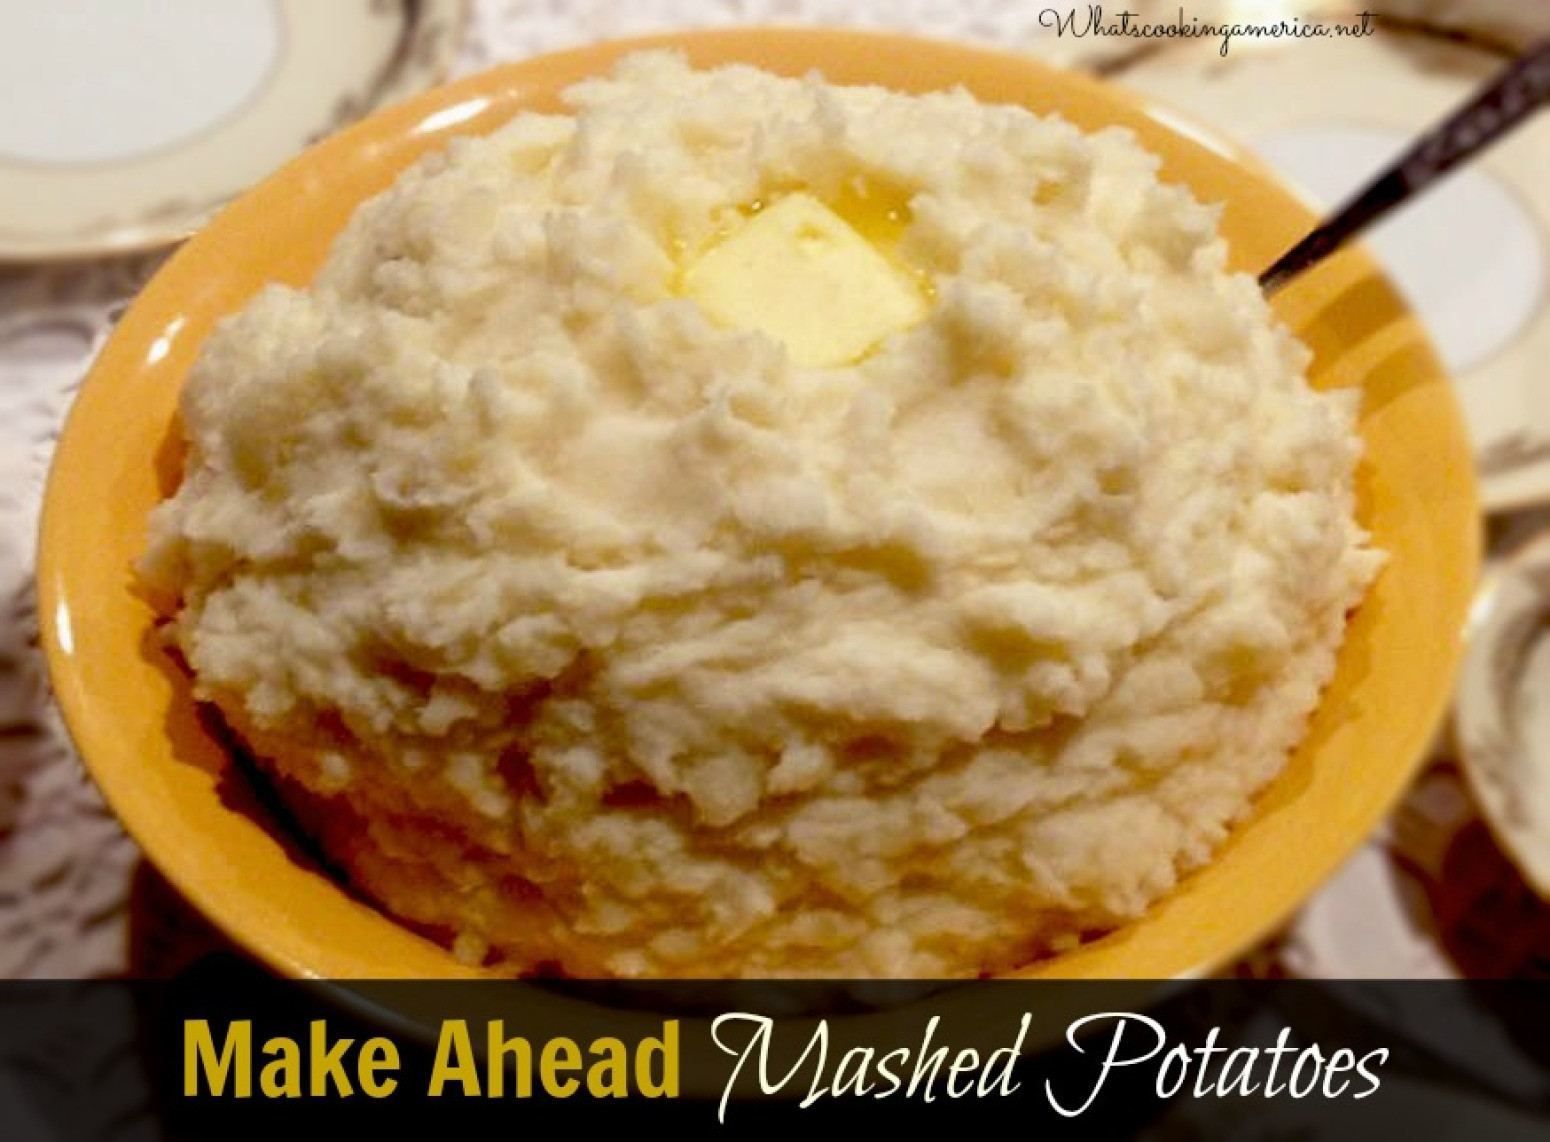 Make Ahead Mashed Potatoes For Thanksgiving
 Best MakeAhead Mashed Potato Recipe Perfect Mashed Potato